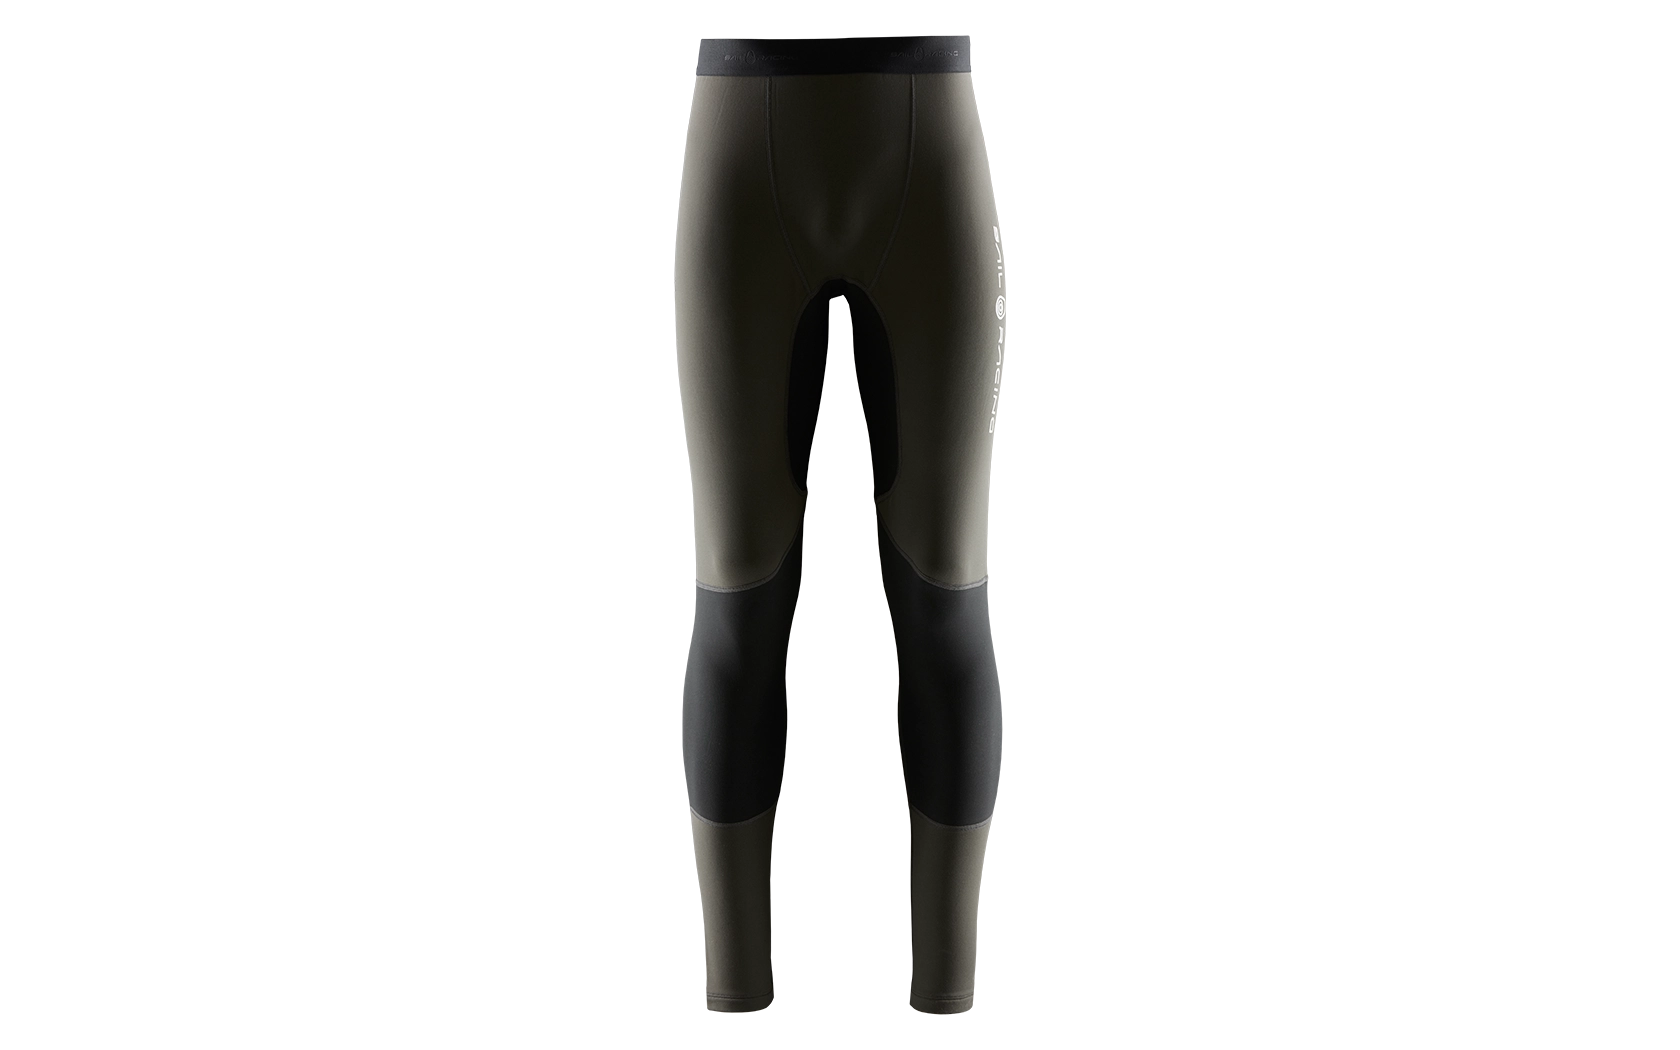 REFERENCE THERMAL PANT